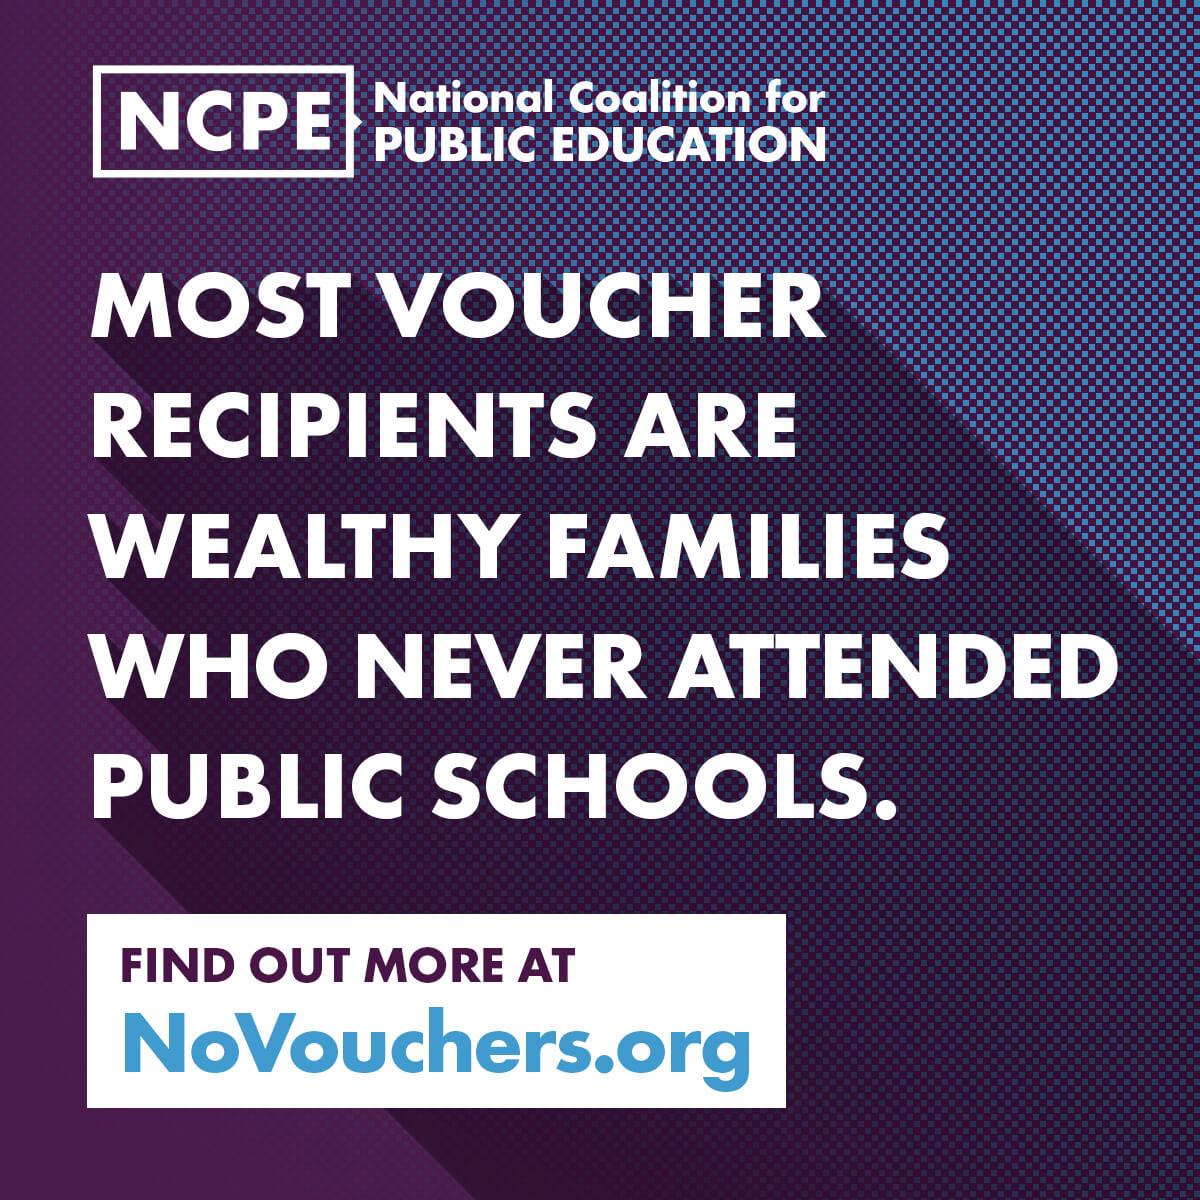 Most voucher recipients are wealthy families who never attended public schools